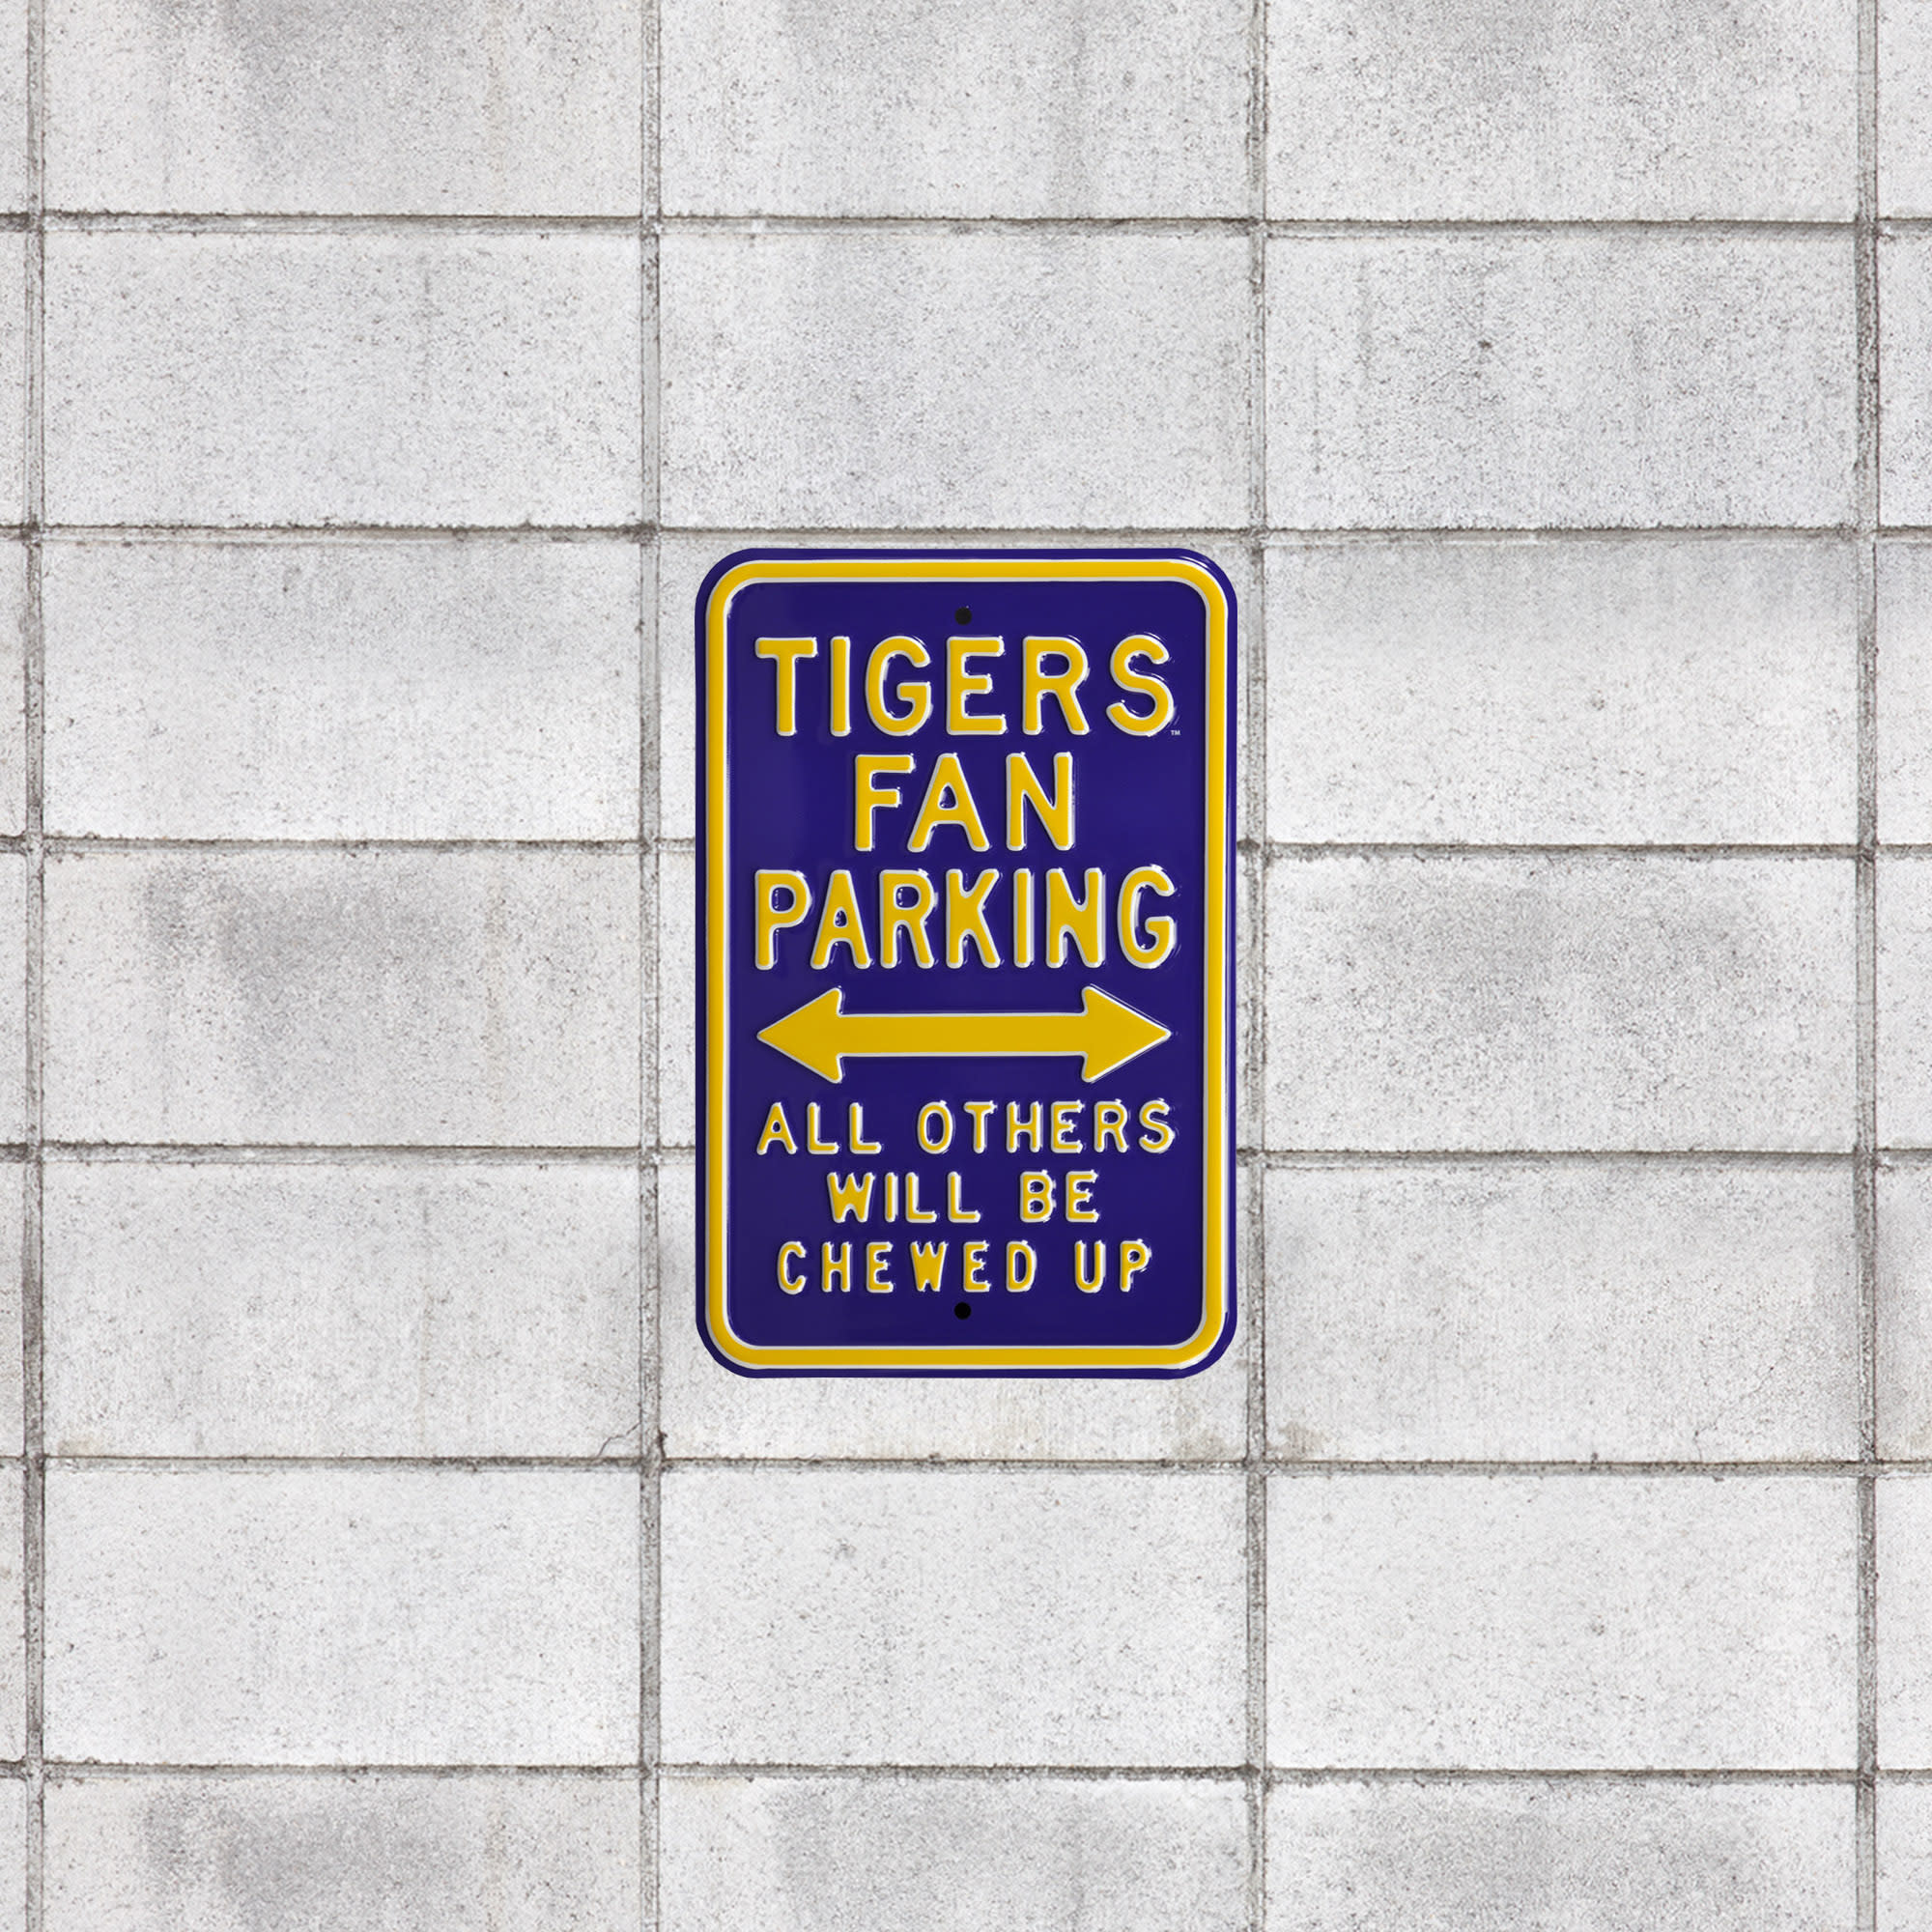 LSU Tigers: Chewed Up Parking - Officially Licensed Metal Street Sign 18.0"W x 12.0"H by Fathead | 100% Steel